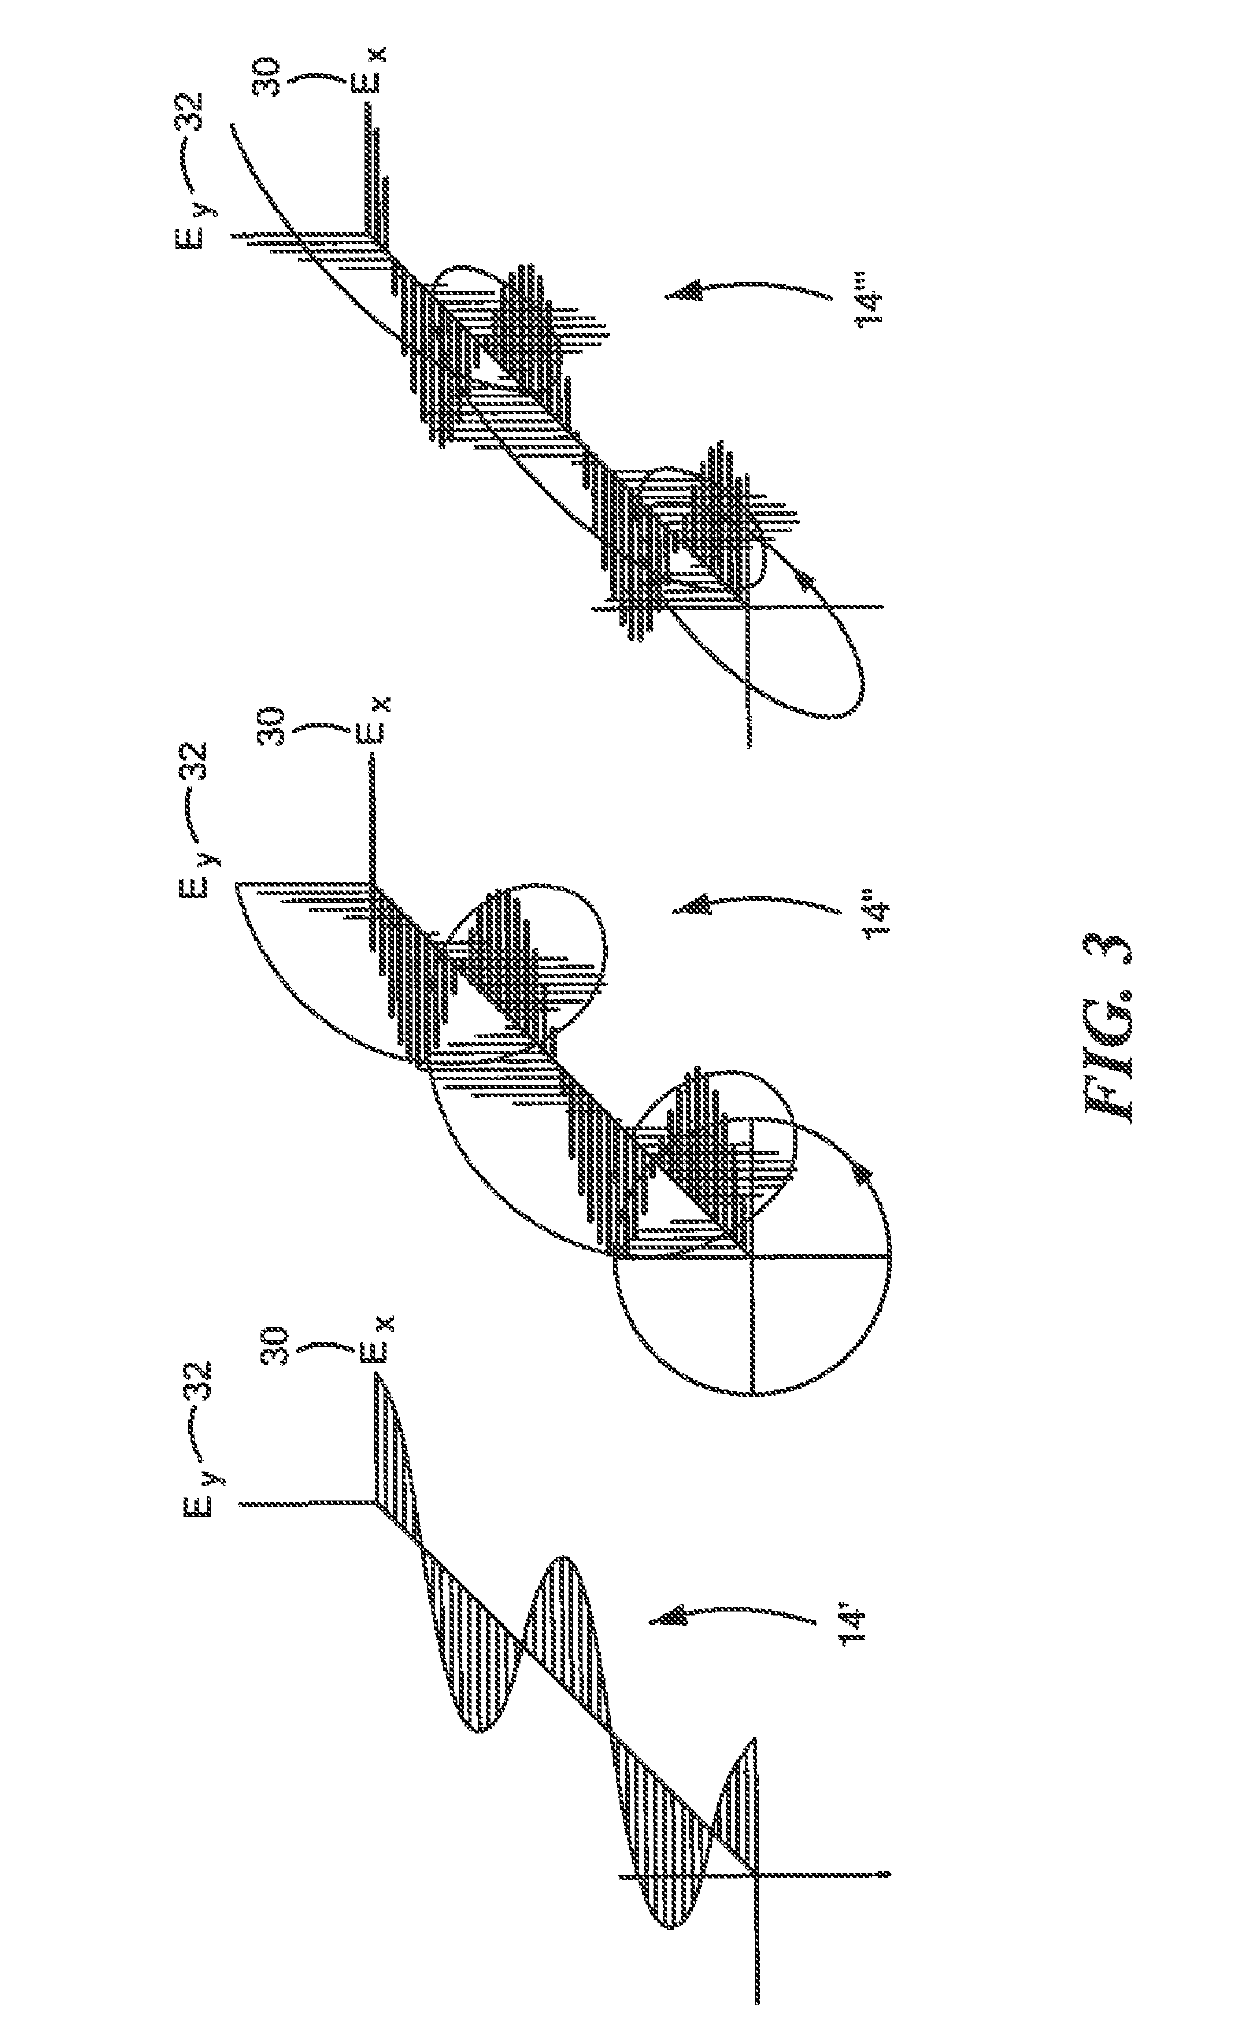 Contactless System and Method For Assessing Tissue Viability and Other Hemodynamic Parameters